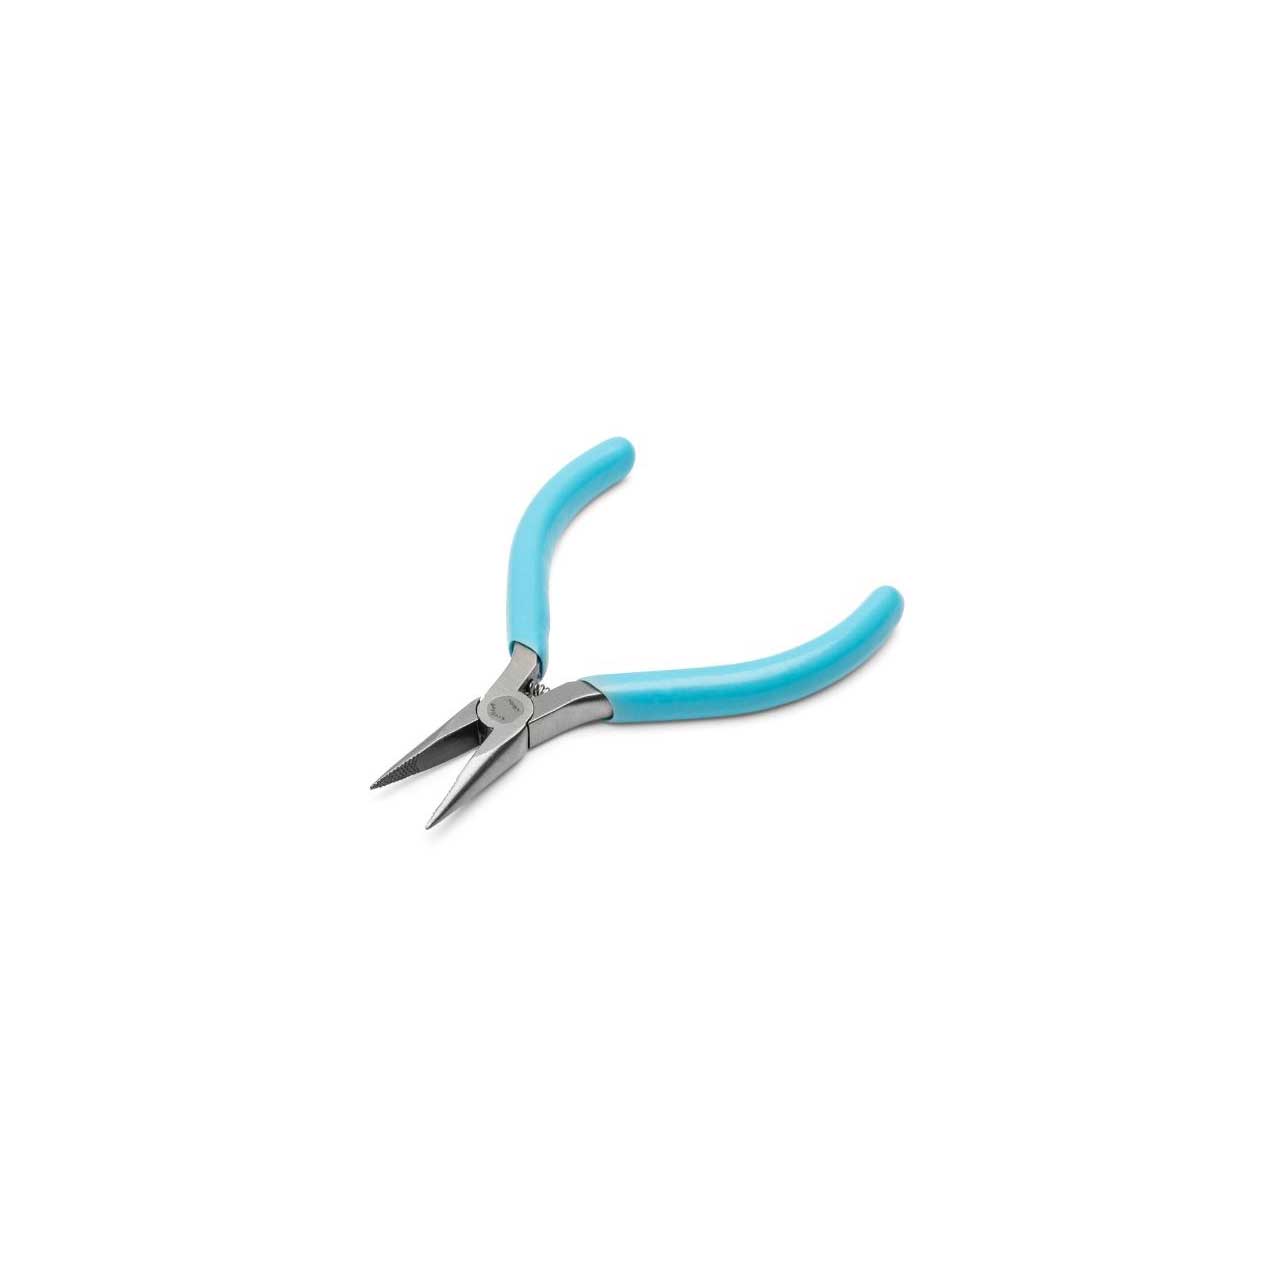 Weller-Xcelite L4VN Subminiature Needle Nose Pliers - 4 Inch - Serrated L4VN